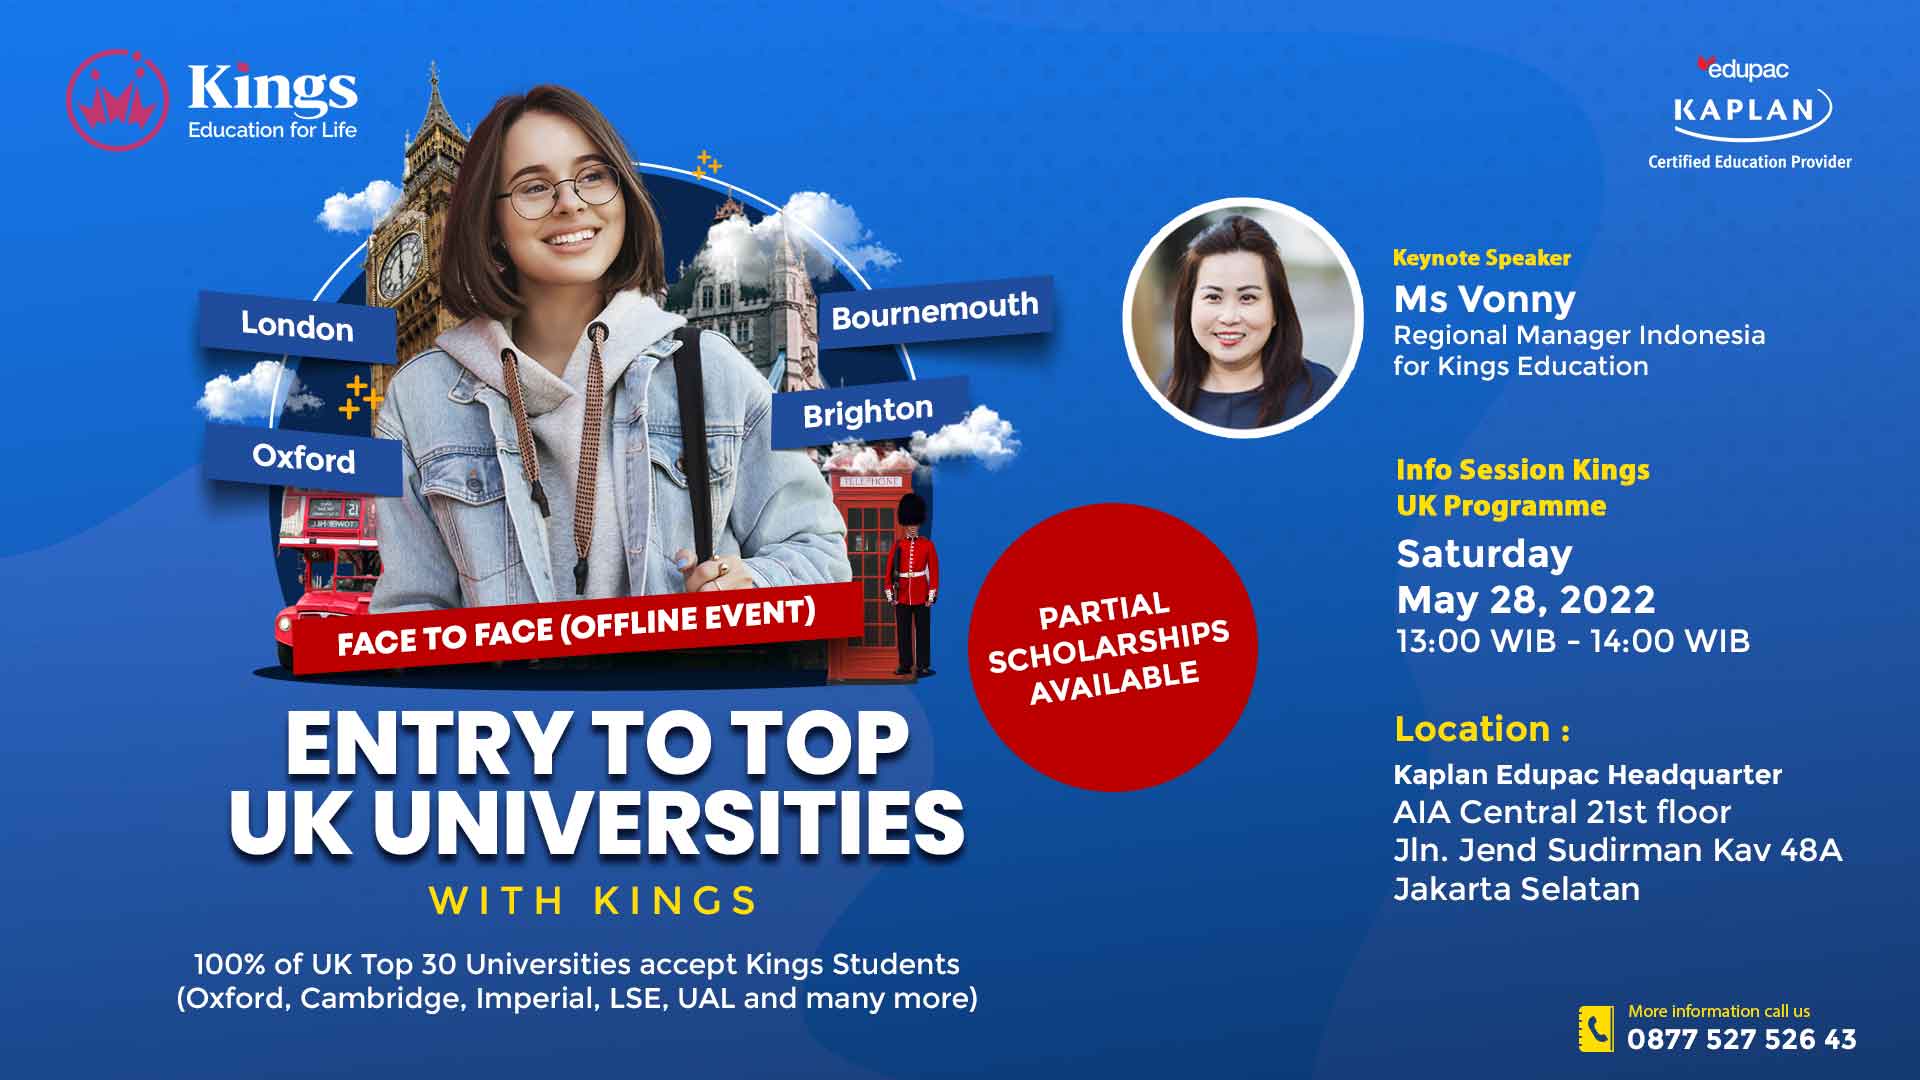 Face to Face (Offline Event) : Entry to Top UK University with Kings (Scholarships Available) 